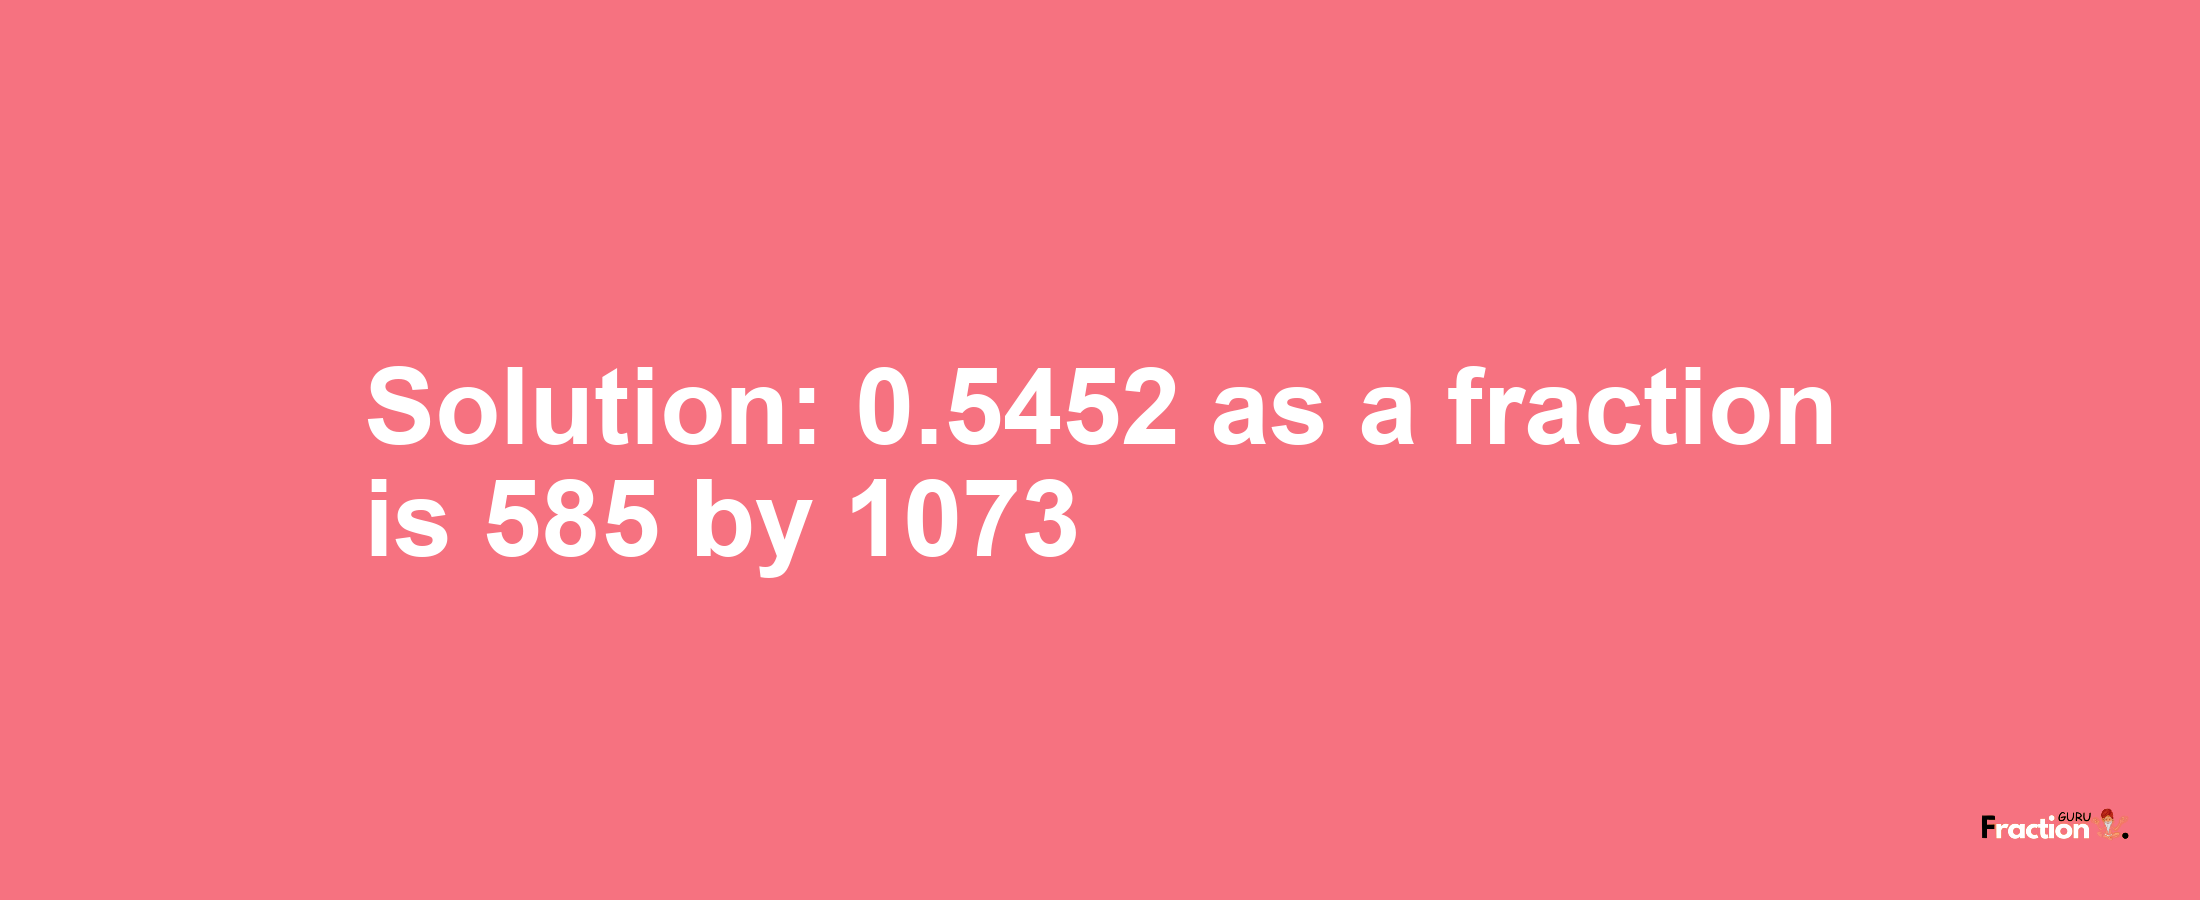 Solution:0.5452 as a fraction is 585/1073